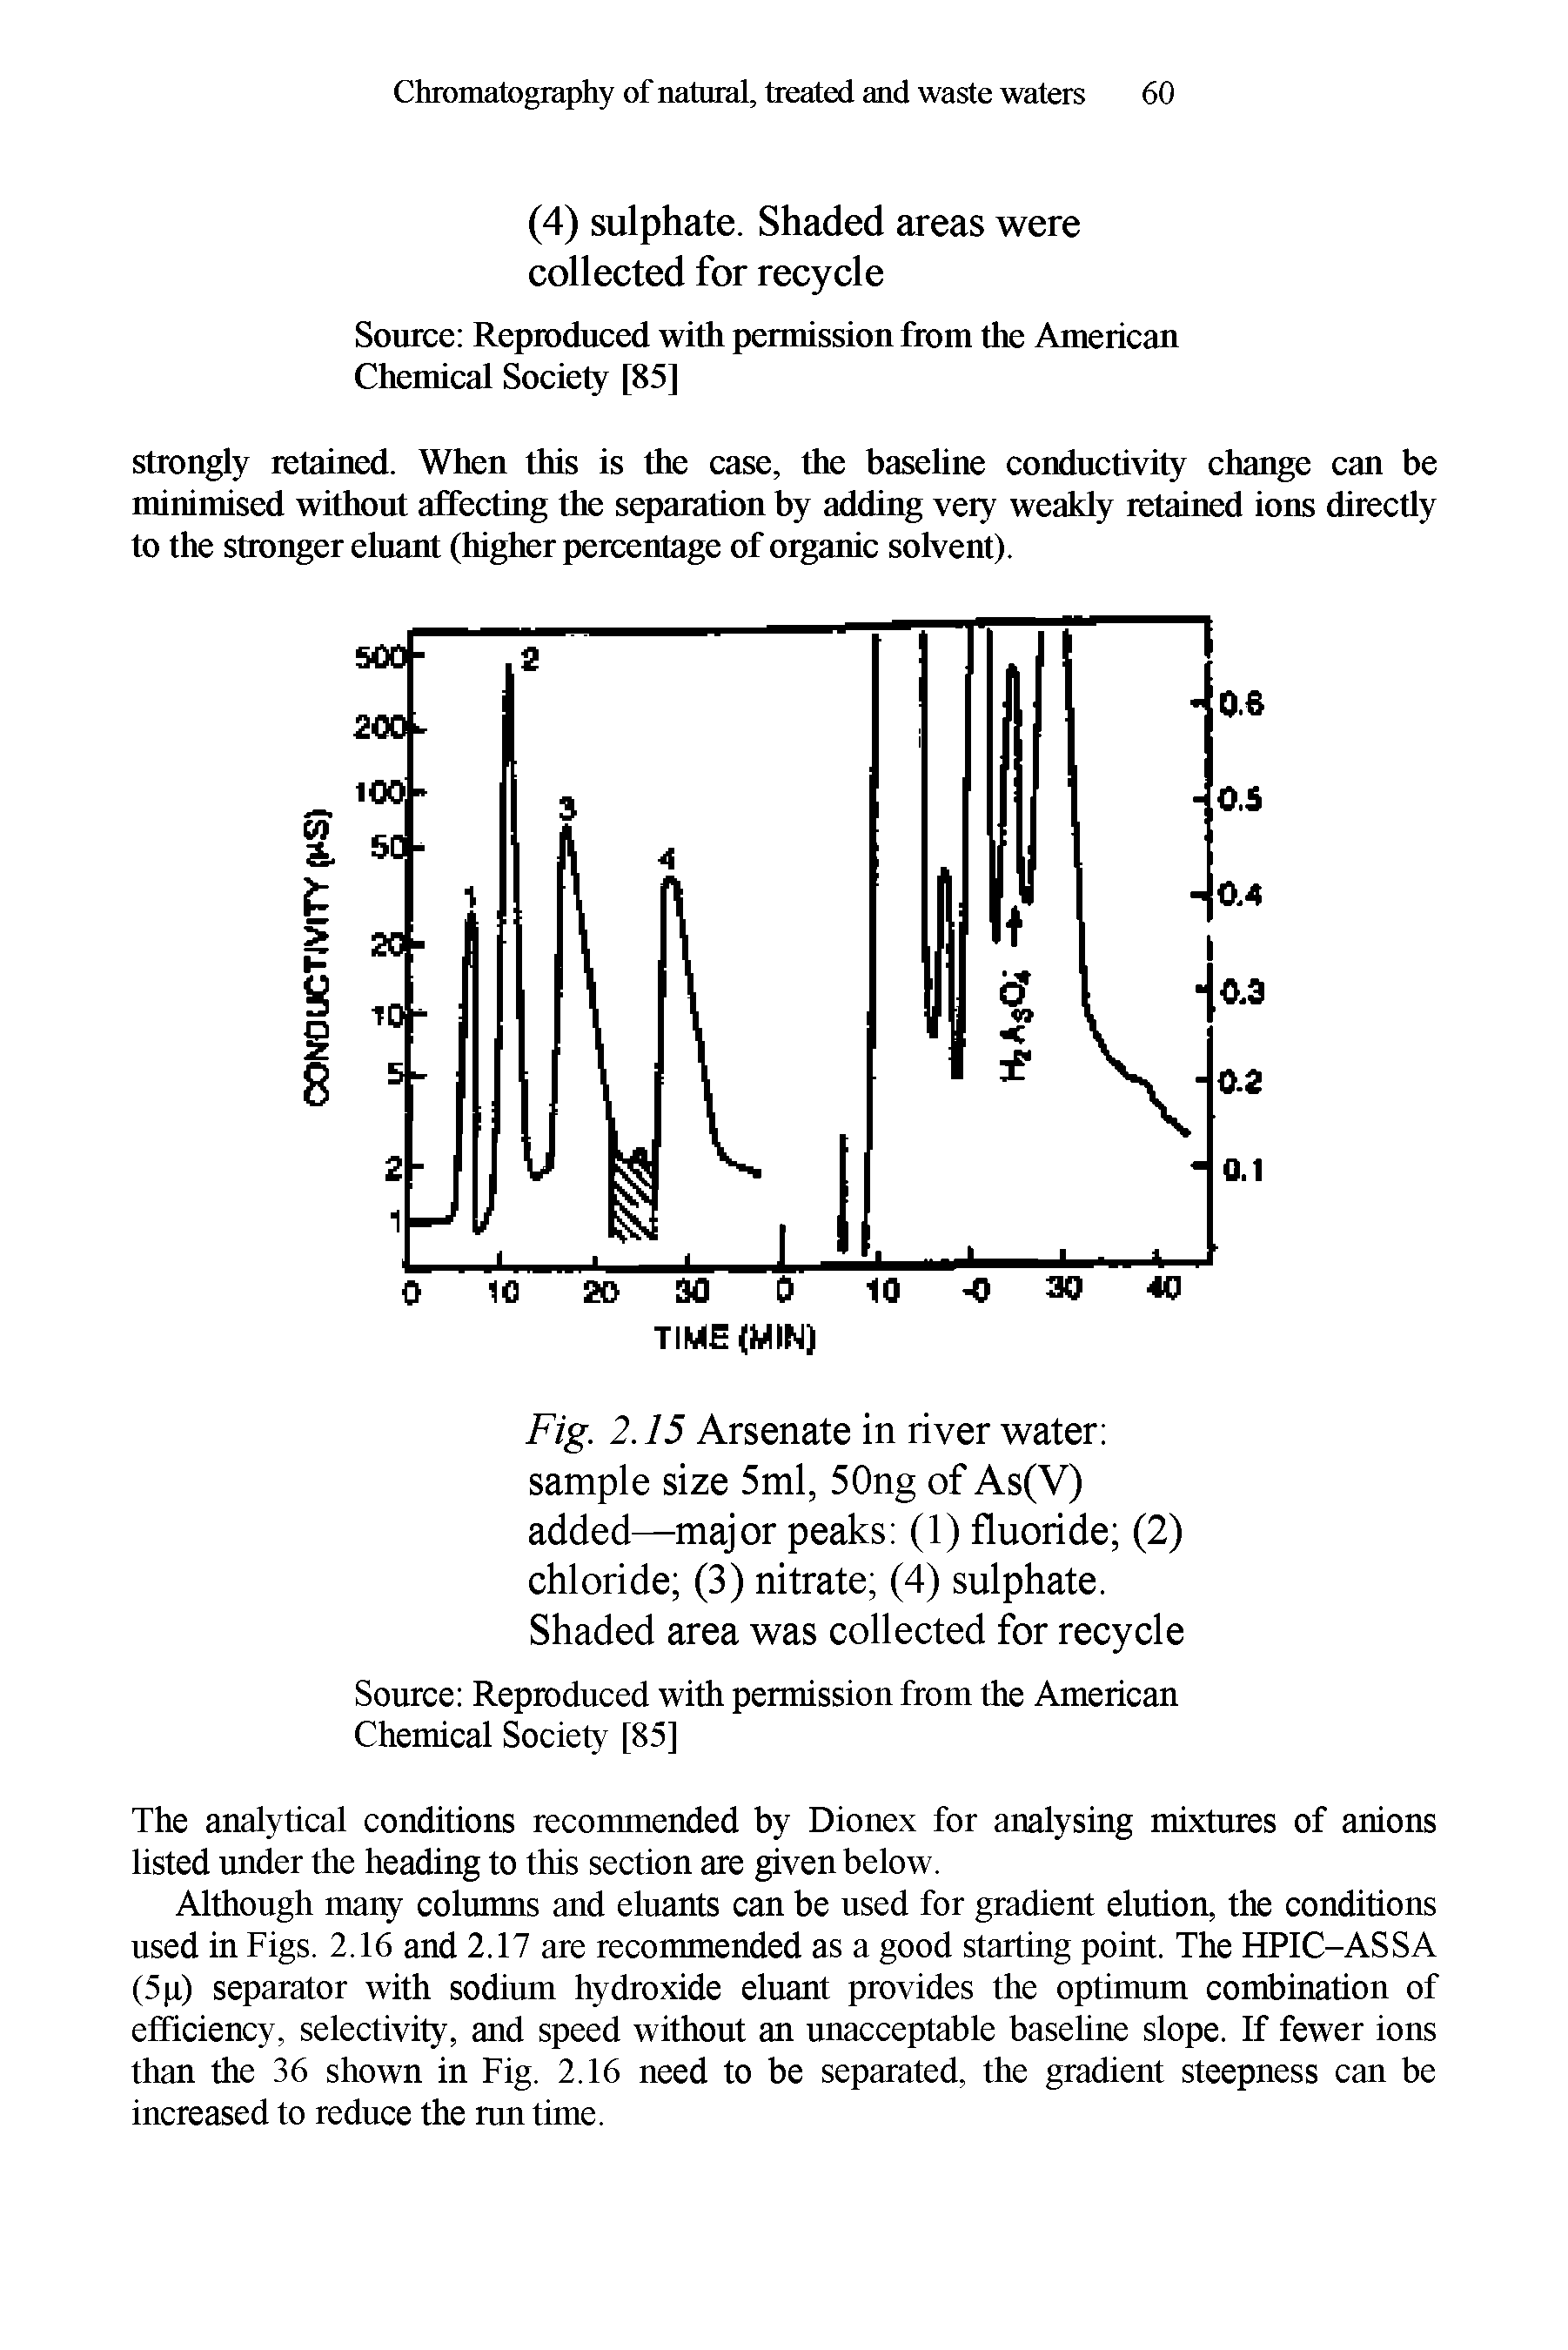 Fig. 2.15 Arsenate in river water sample size 5ml, 50ng of As(V) added—major peaks (1) fluoride (2) chloride (3) nitrate (4) sulphate.